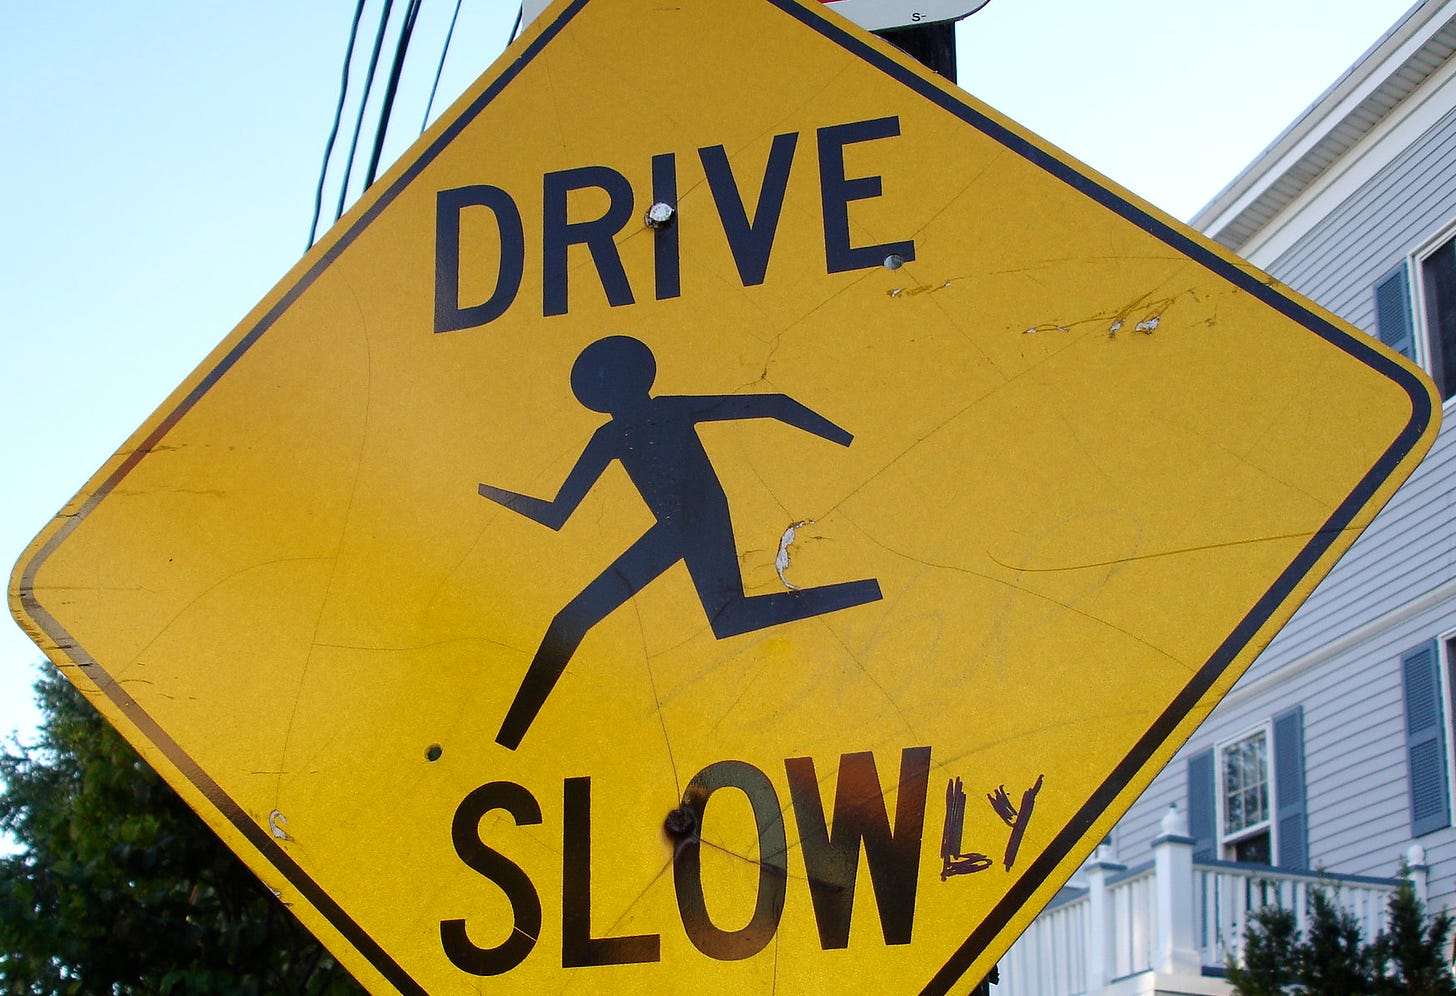 A sign that originally read "DRIVE SLOW" corrected to read "DRIVE SLOWLY"